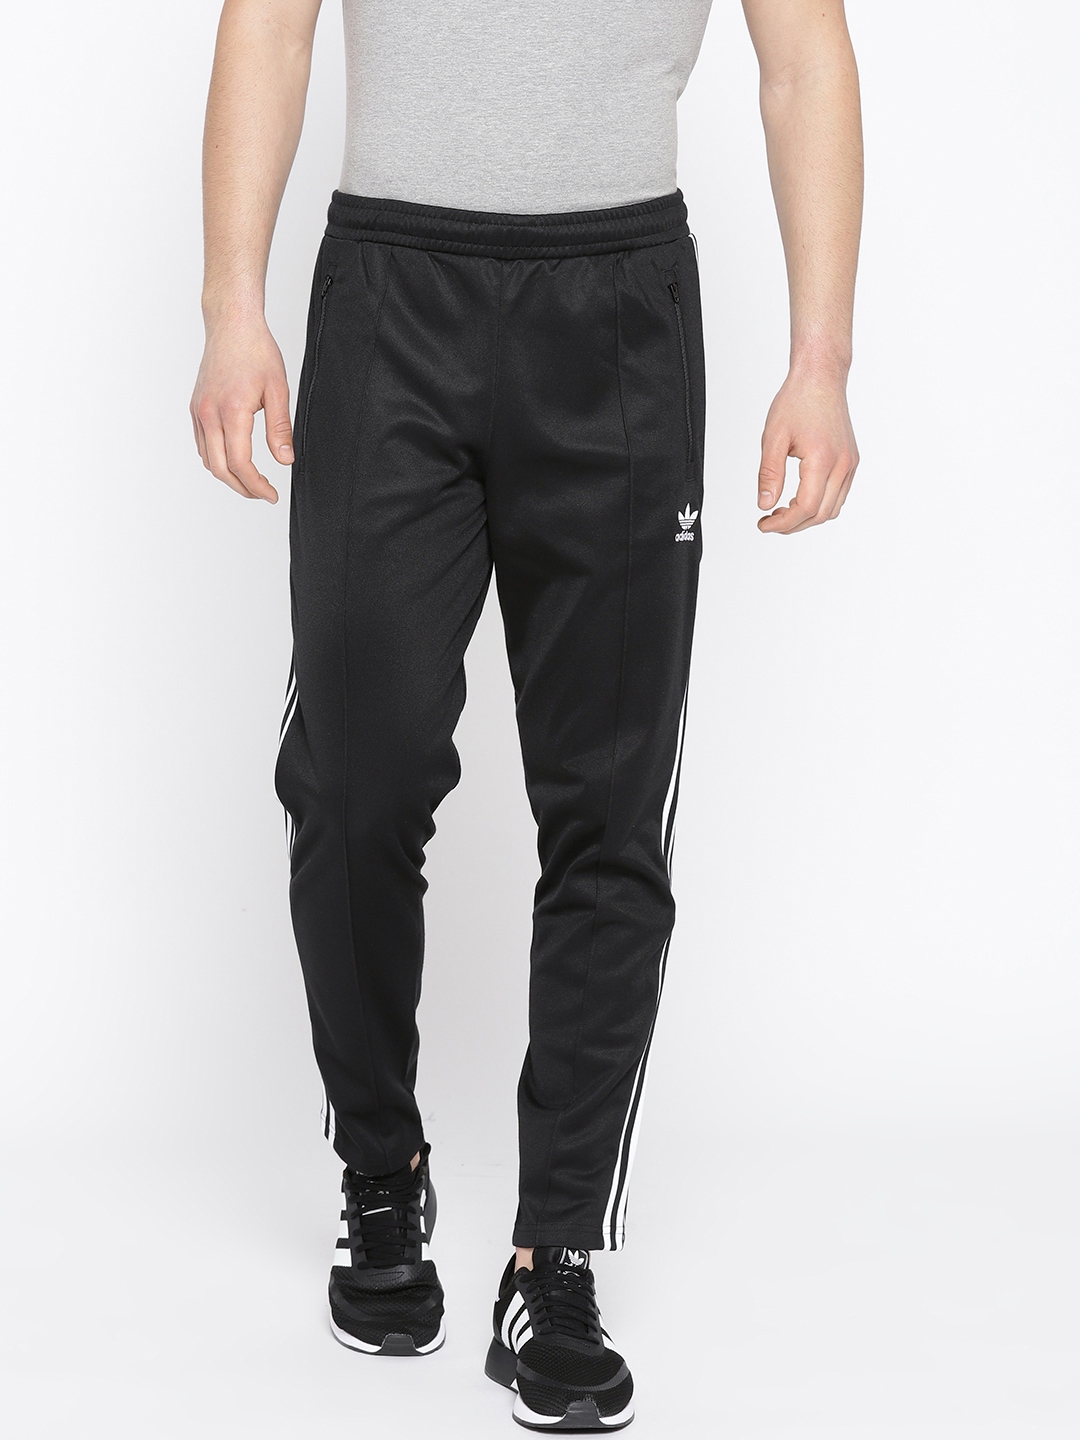 adidas Beckenbauer Track Pant - ShopStyle Activewear Trousers